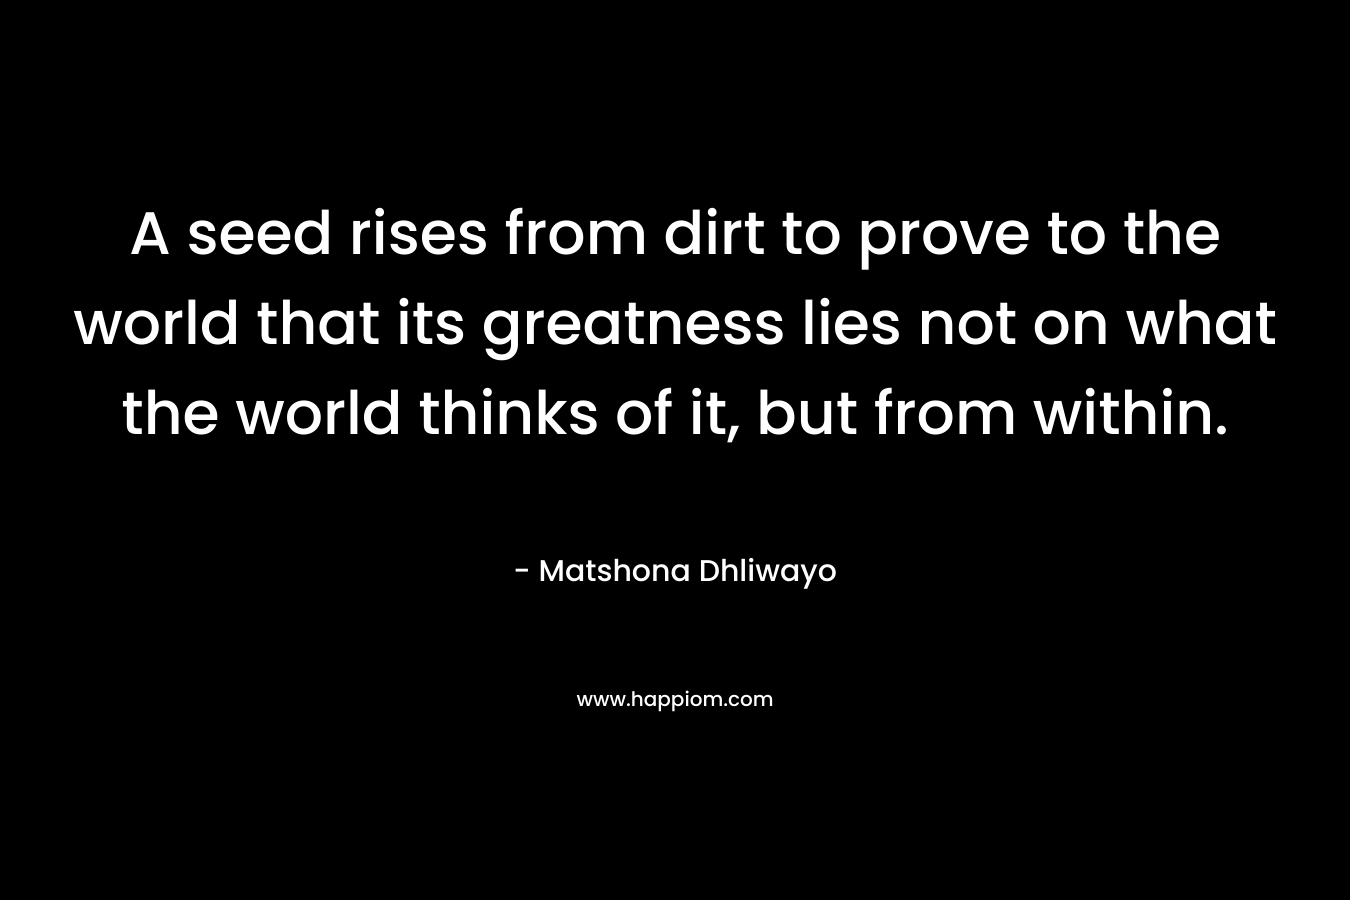 A seed rises from dirt to prove to the world that its greatness lies not on what the world thinks of it, but from within. – Matshona Dhliwayo